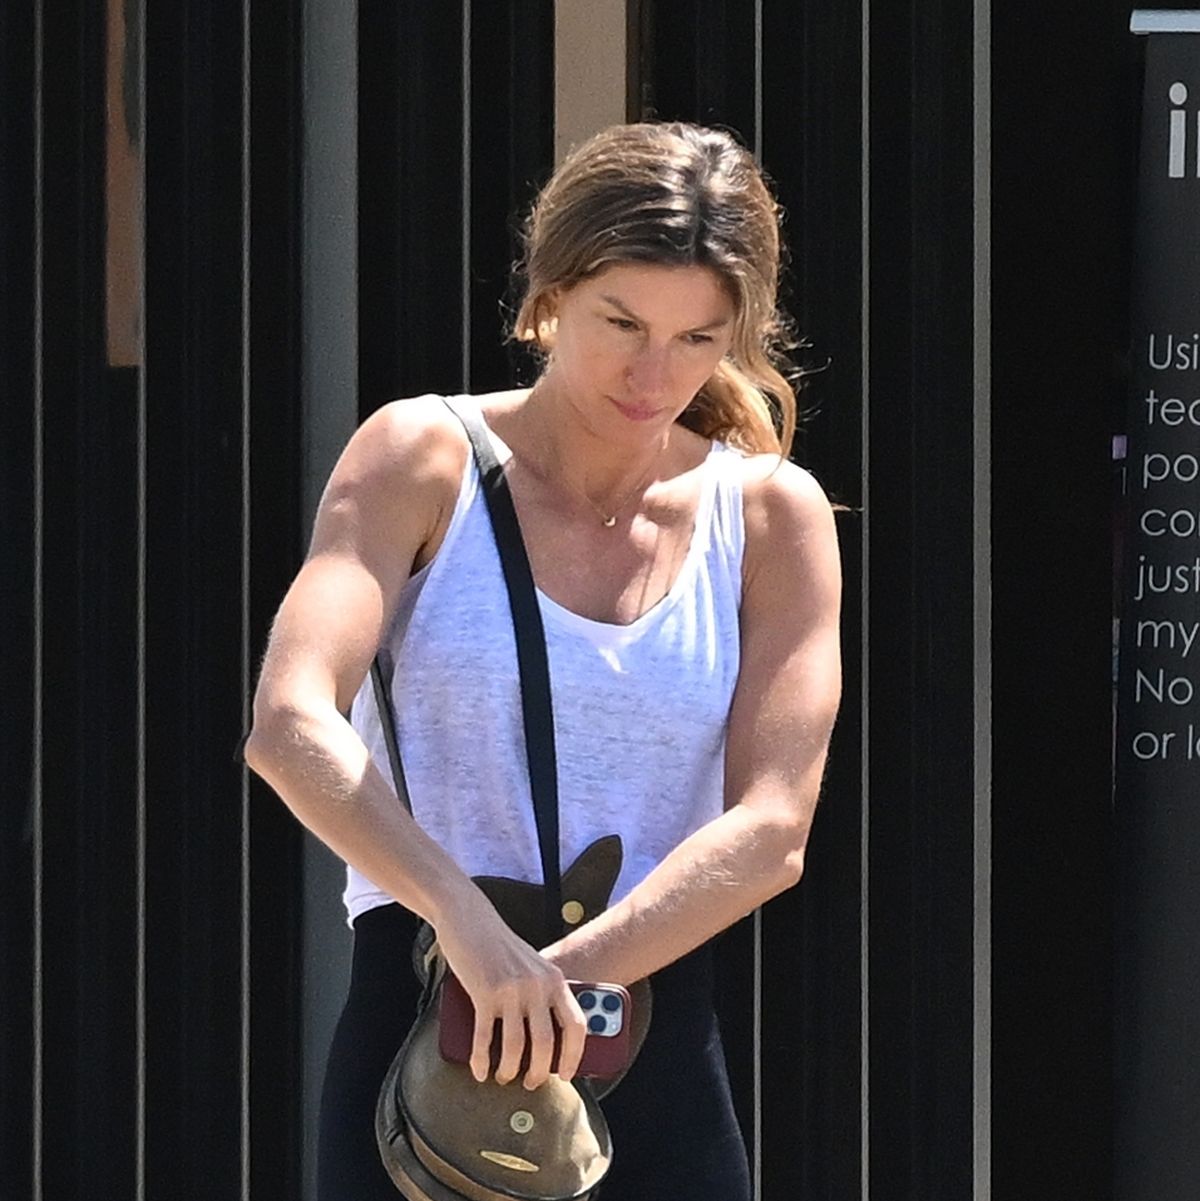 Shop Gisele Bündchen's ab-baring Year of Ours workout set